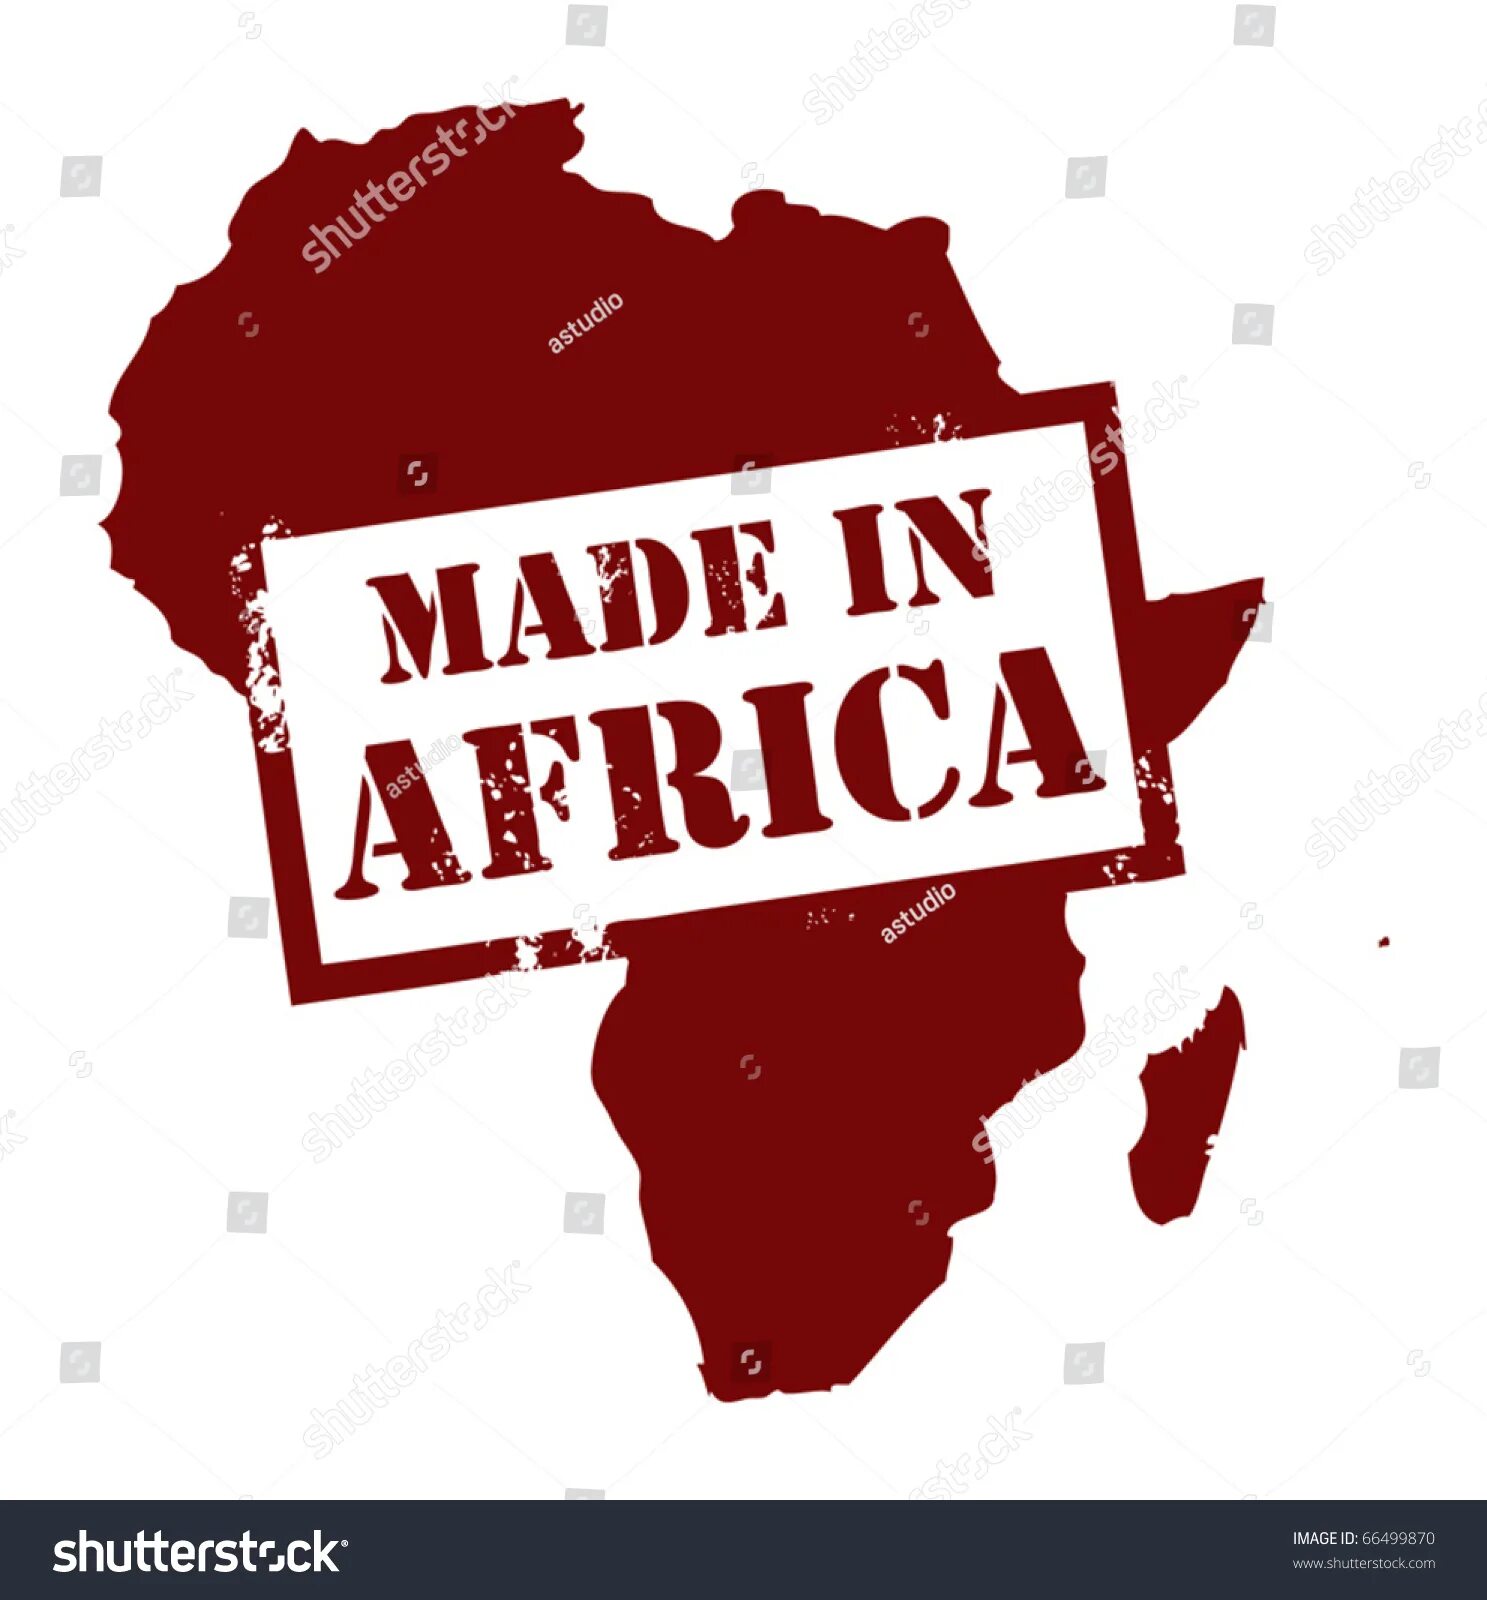 Made in africa. Маде ин Африка. Фото made in South Africa. Принт со словом Африка. Africa Word.